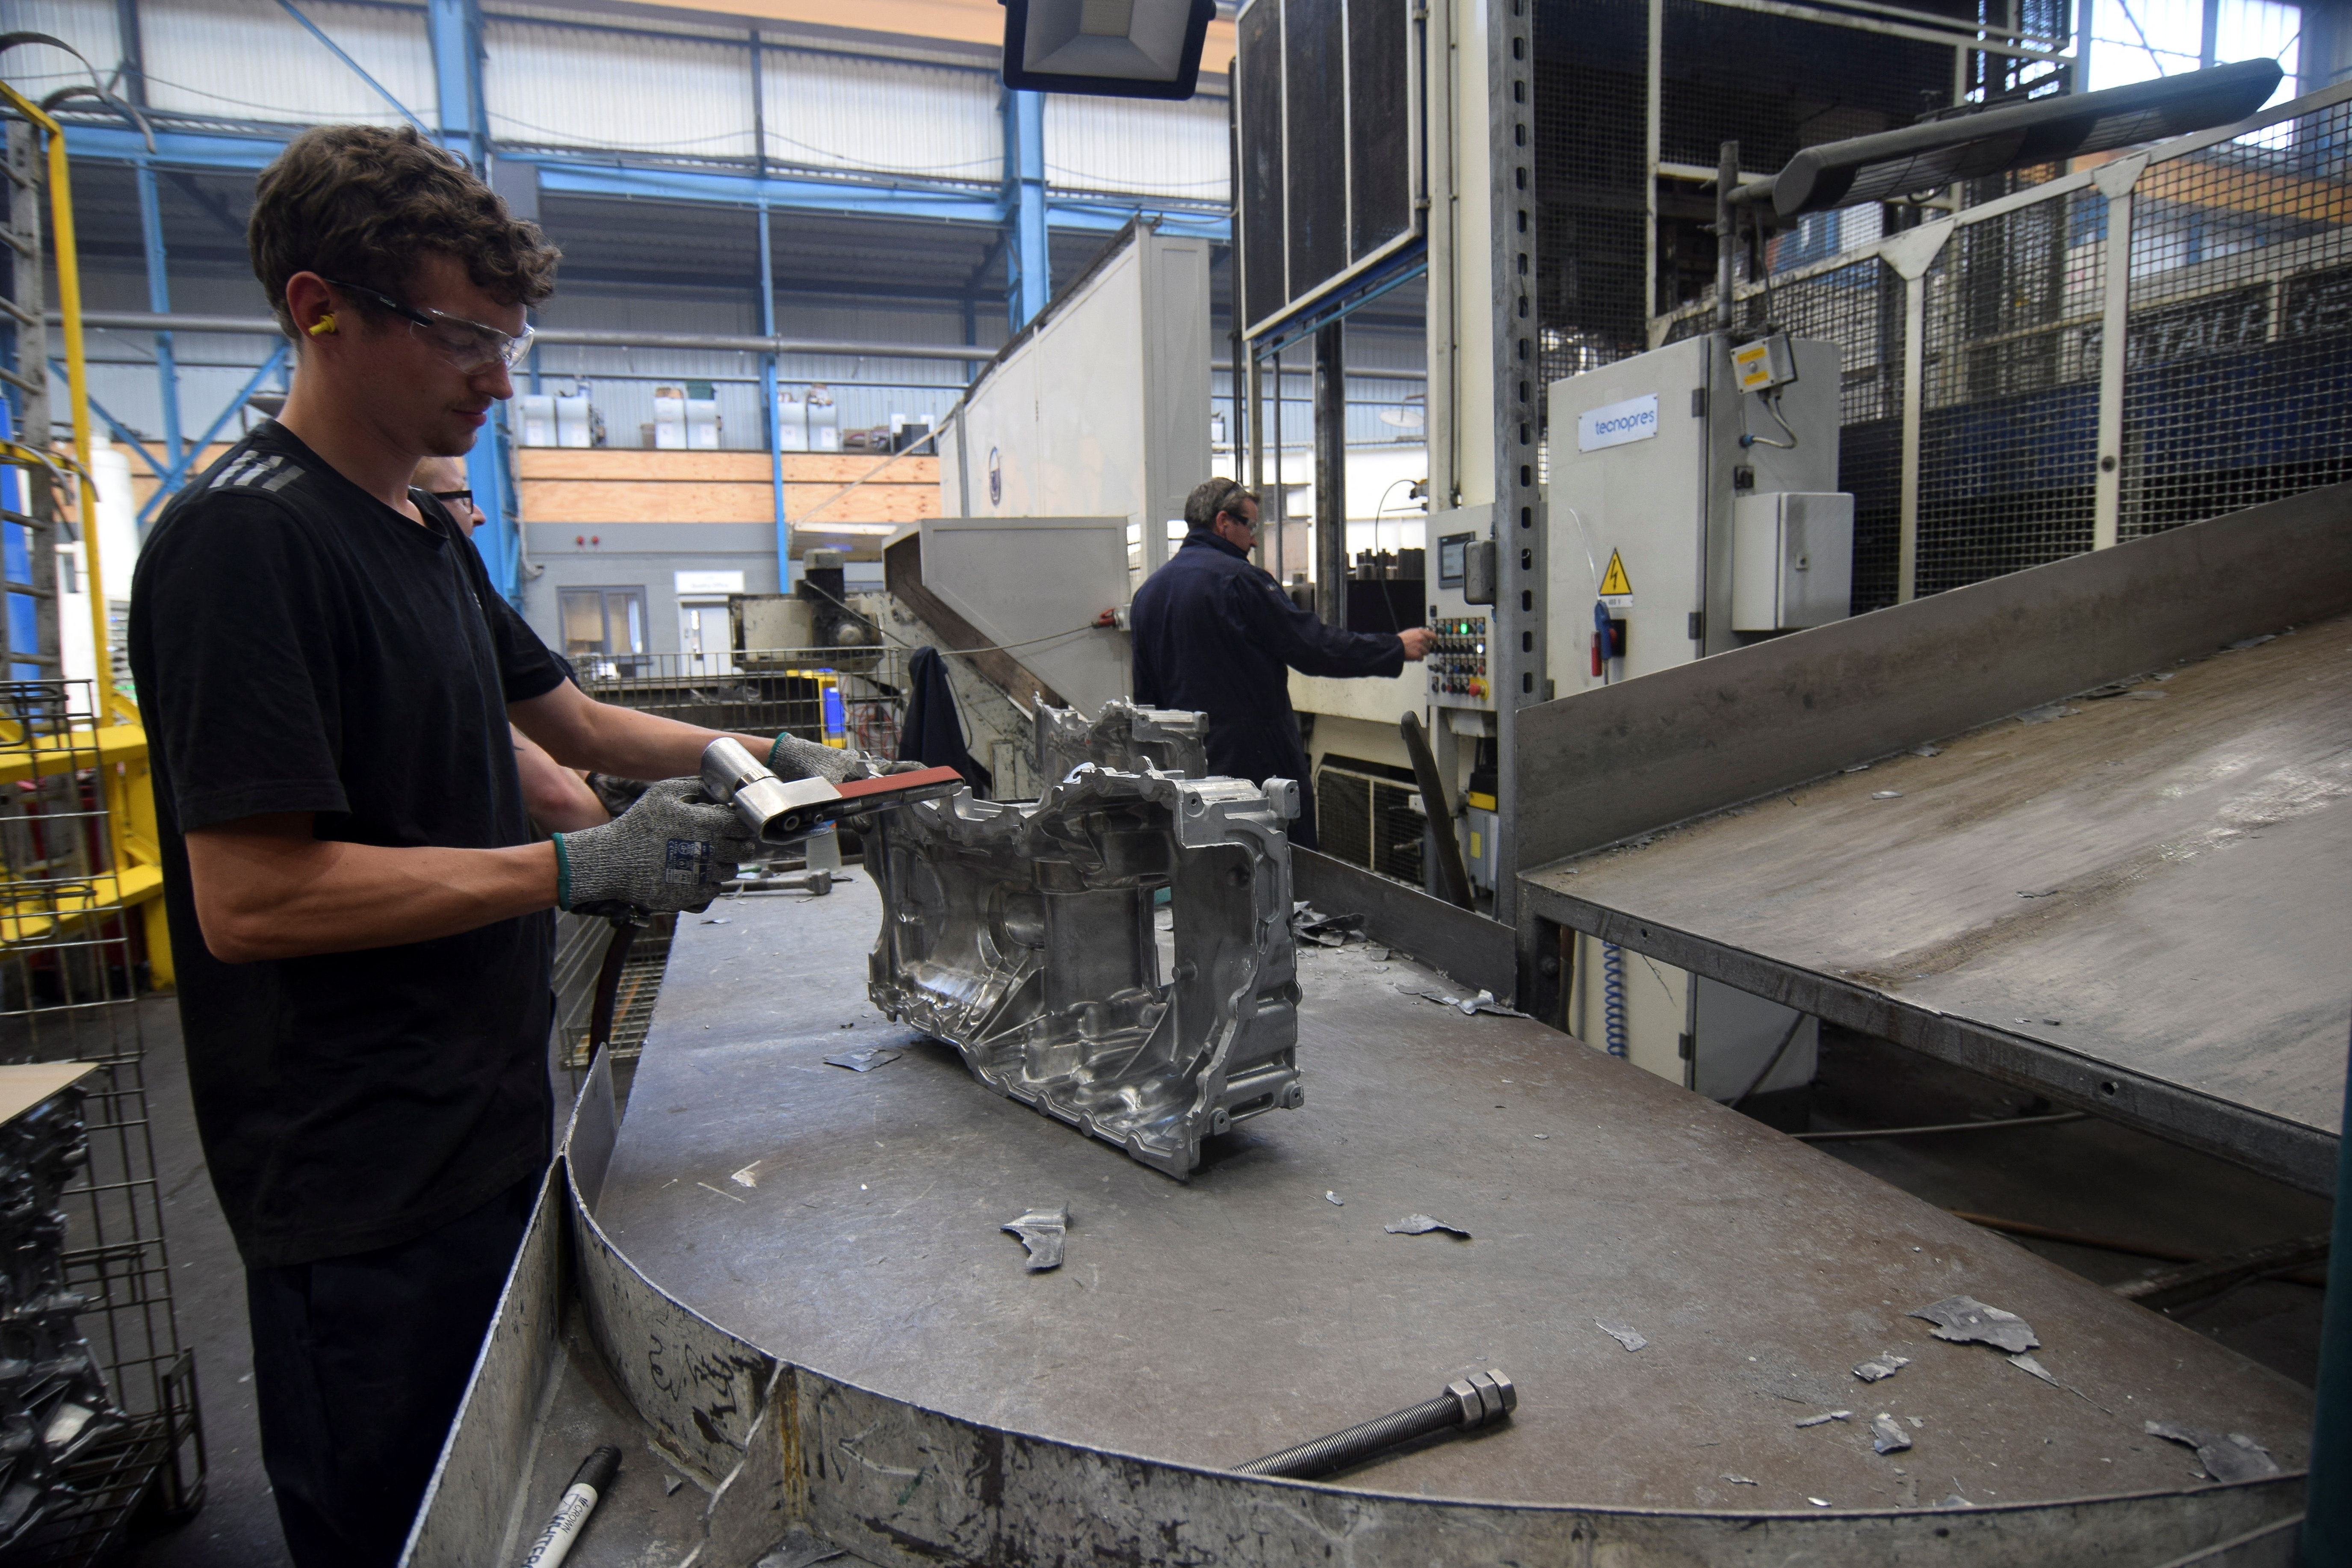 A worker at Evtec Aluminium Ltd sands excess metal off a freshly made aluminium part at the company's foundry, in Kidderminste